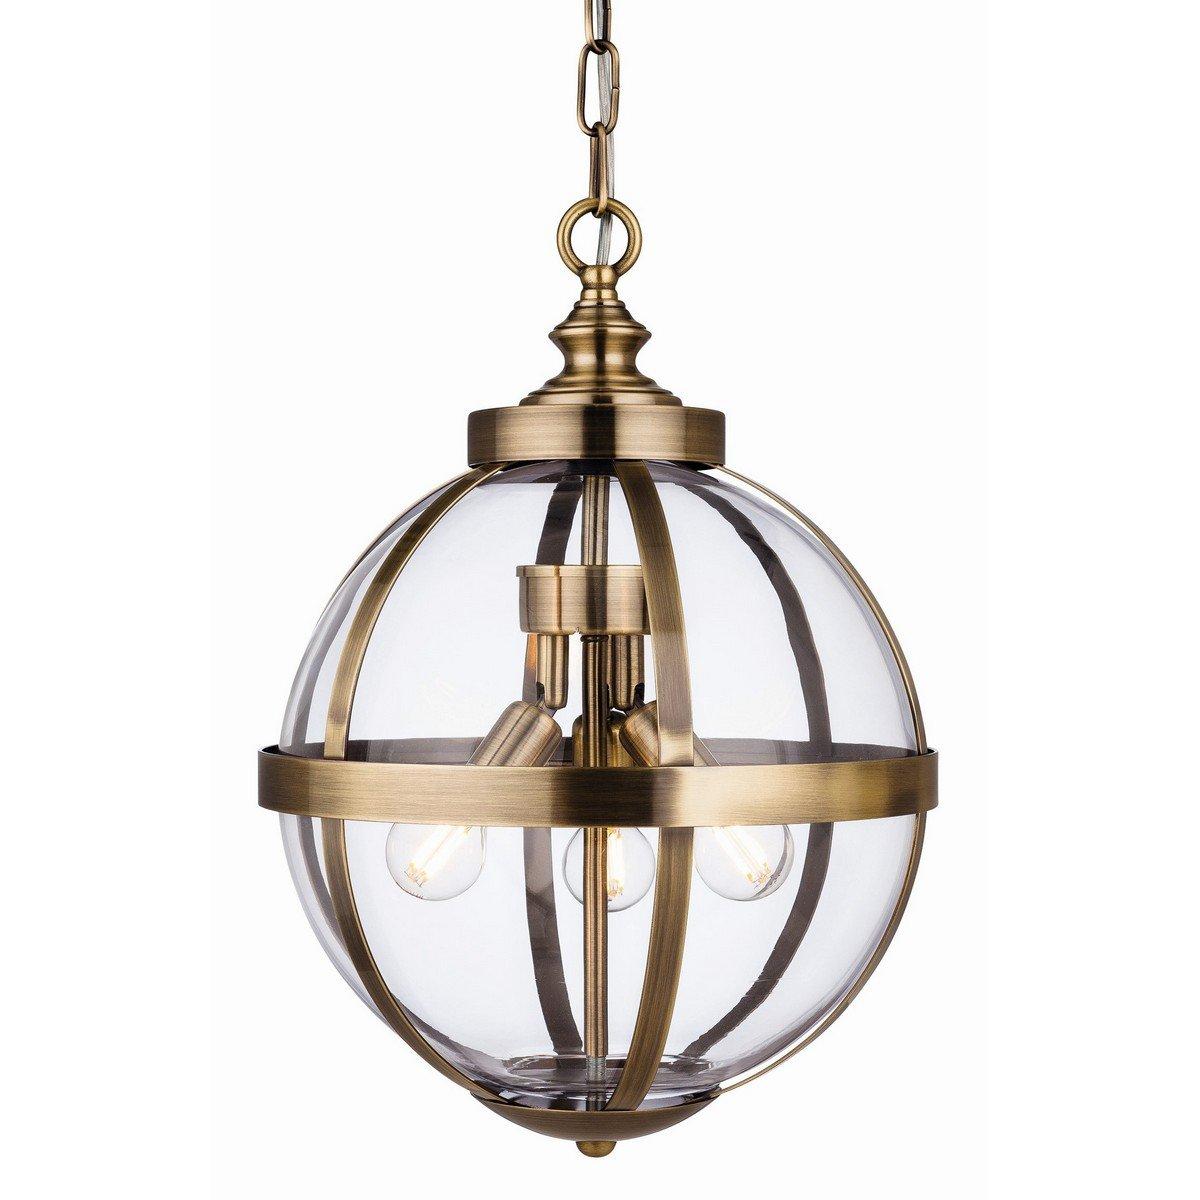 Monroe 3 Light Cage Ceiling Pendant Antique Brass with Clear Glass E14